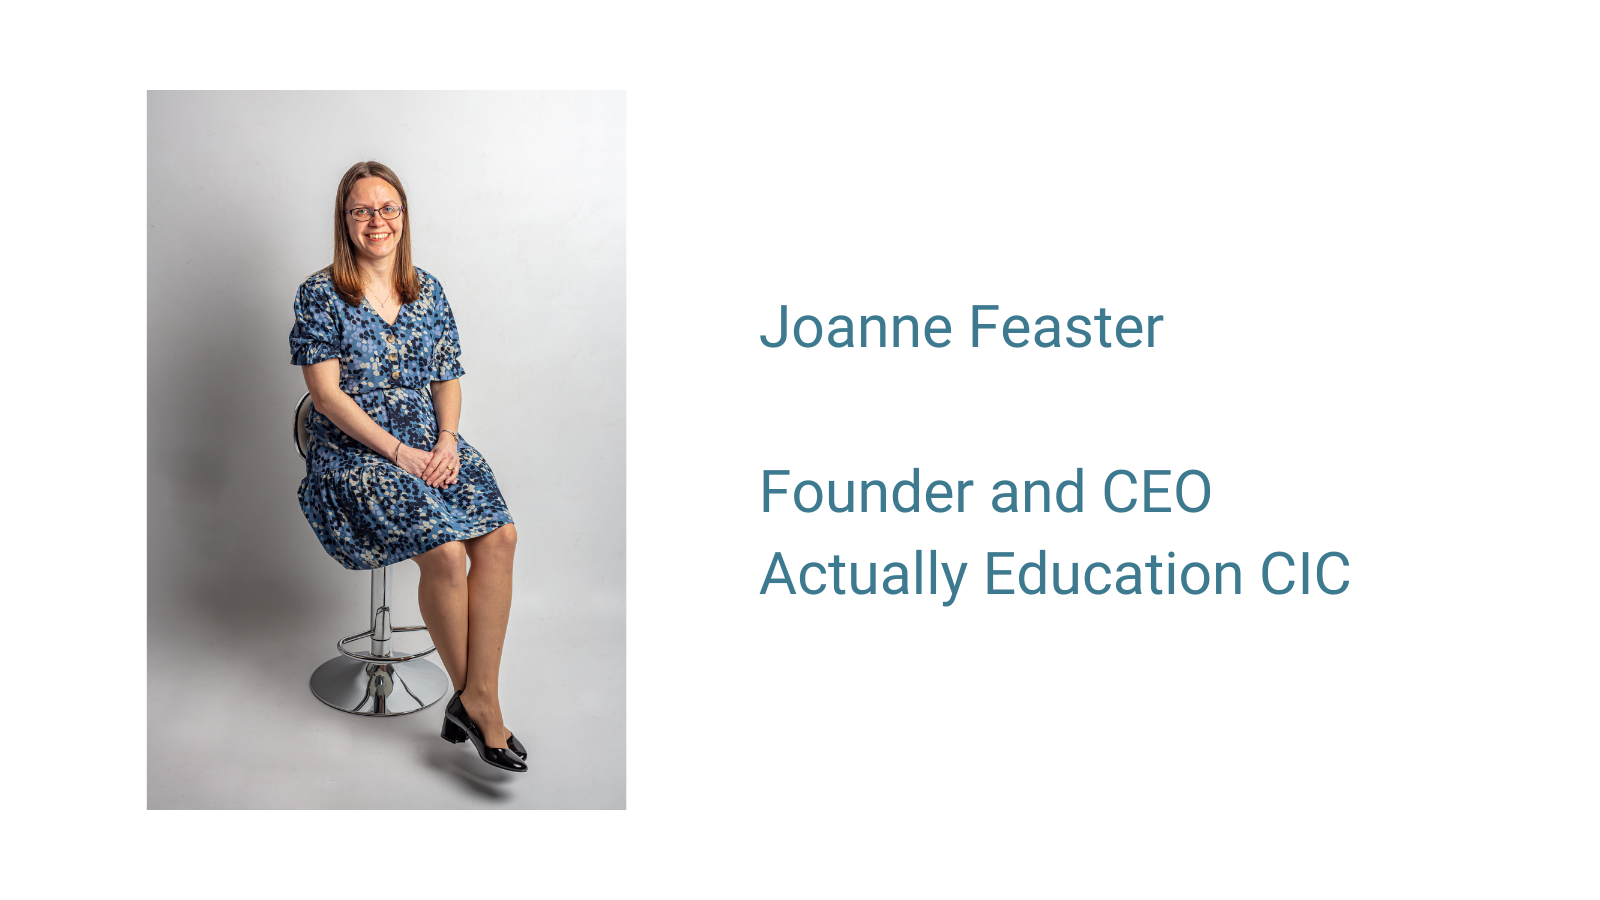 Picture of Joanne Feaster sitting on a chair with a blue dress and grey background. Founder and CEO of Actually Education CIC